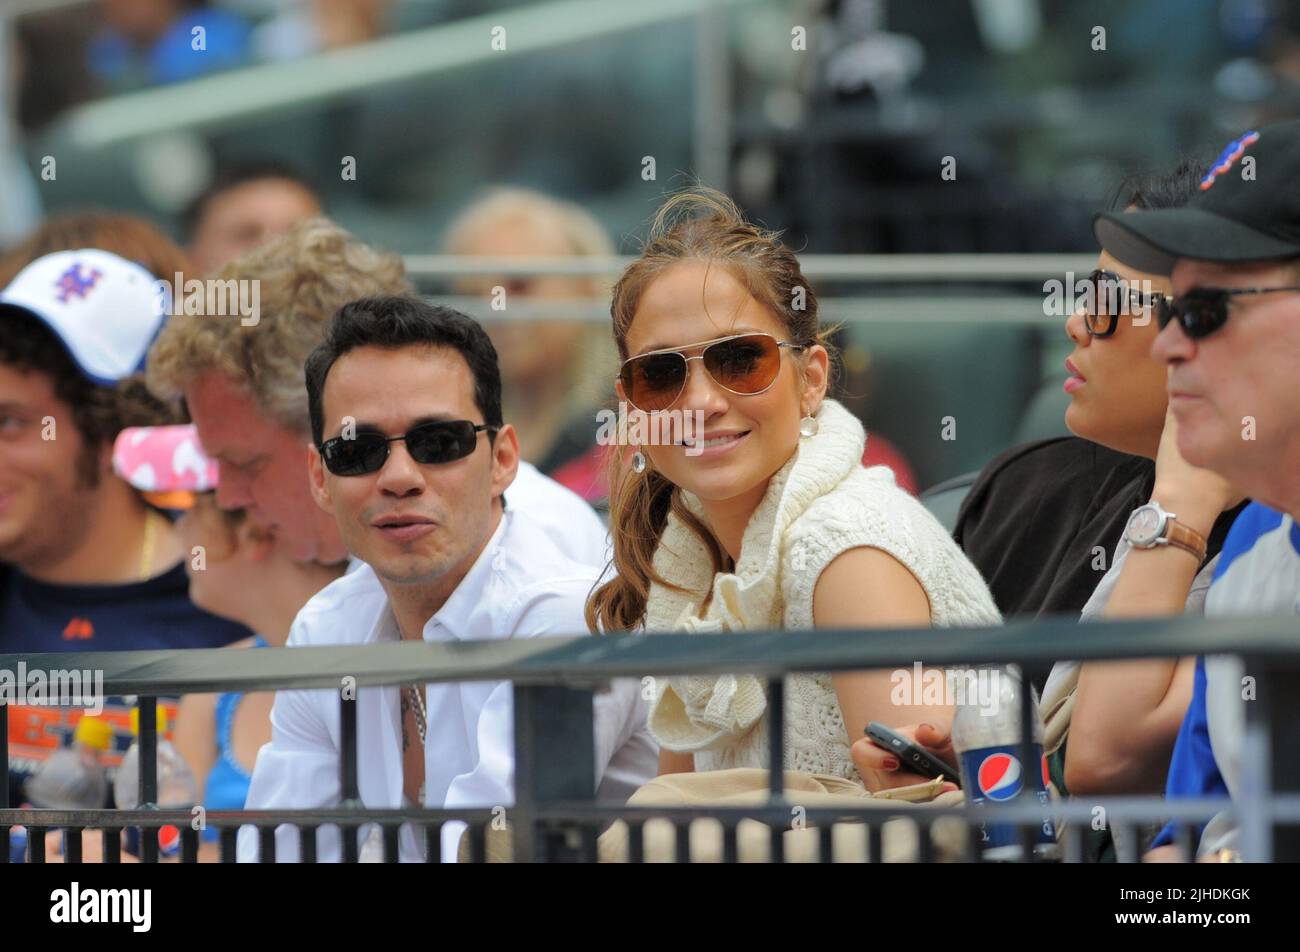 NEW YORK - JUNE 21;  Actress Jennifer Lopez and husband Marc Anthony watch the game between the Tampa Bay Rays and the New York Mets at CitiField. J-Lo looked a little tired and she frequently was caught yawning, and resting on Marcs shoulder. meanwhile Marc Anthony spent time picking his teeth. Jennifer was also seen picking off lint or dirt from marcs collar. The two than enjoyed some peanuts and candy as they watched the game with friend Carlos Beltran wife Jessica (black hair to the left of Jennifer)    on June 21, 2009 in Queens, New York  People:  Jennifer Lopez, Marc Anthony Stock Photo